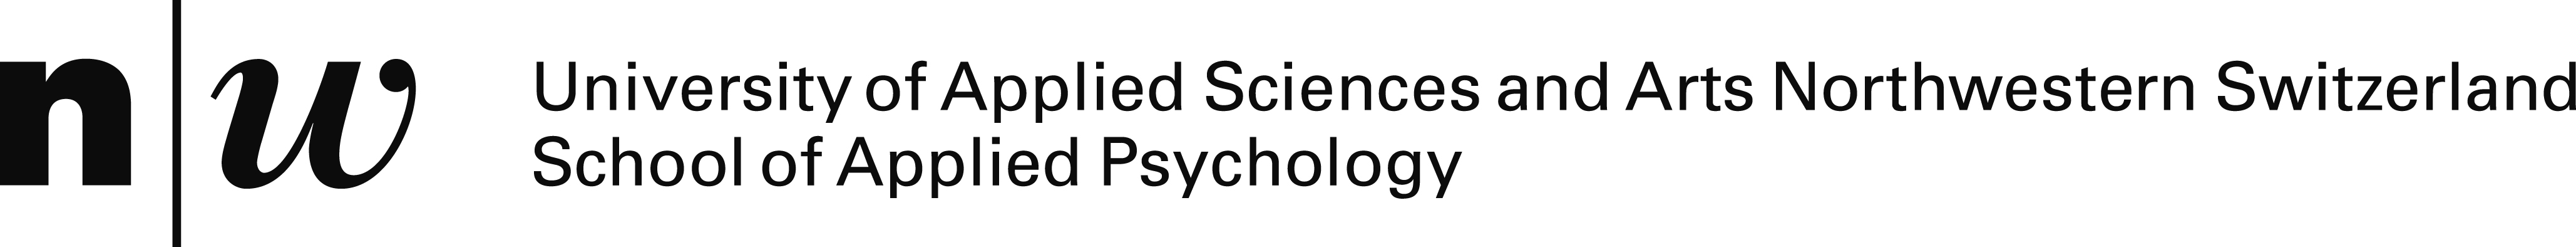 School of Applied Psychology FHNW